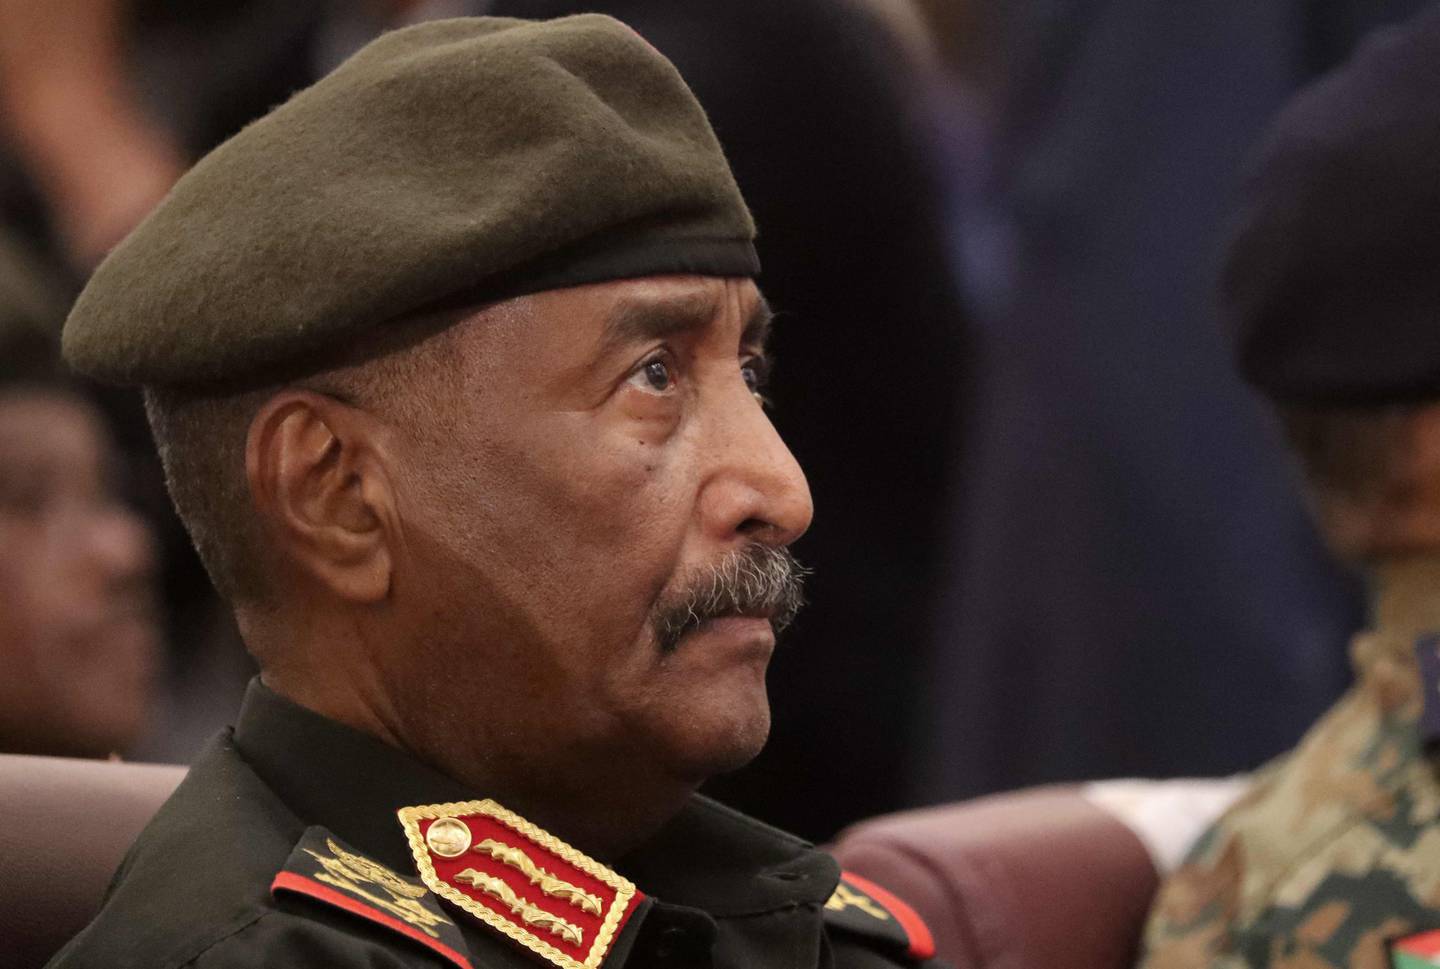 The coup led by Sudan's military leader Gen Abdel Fattah Al Burhan led to a wave of demonstrations. AFP